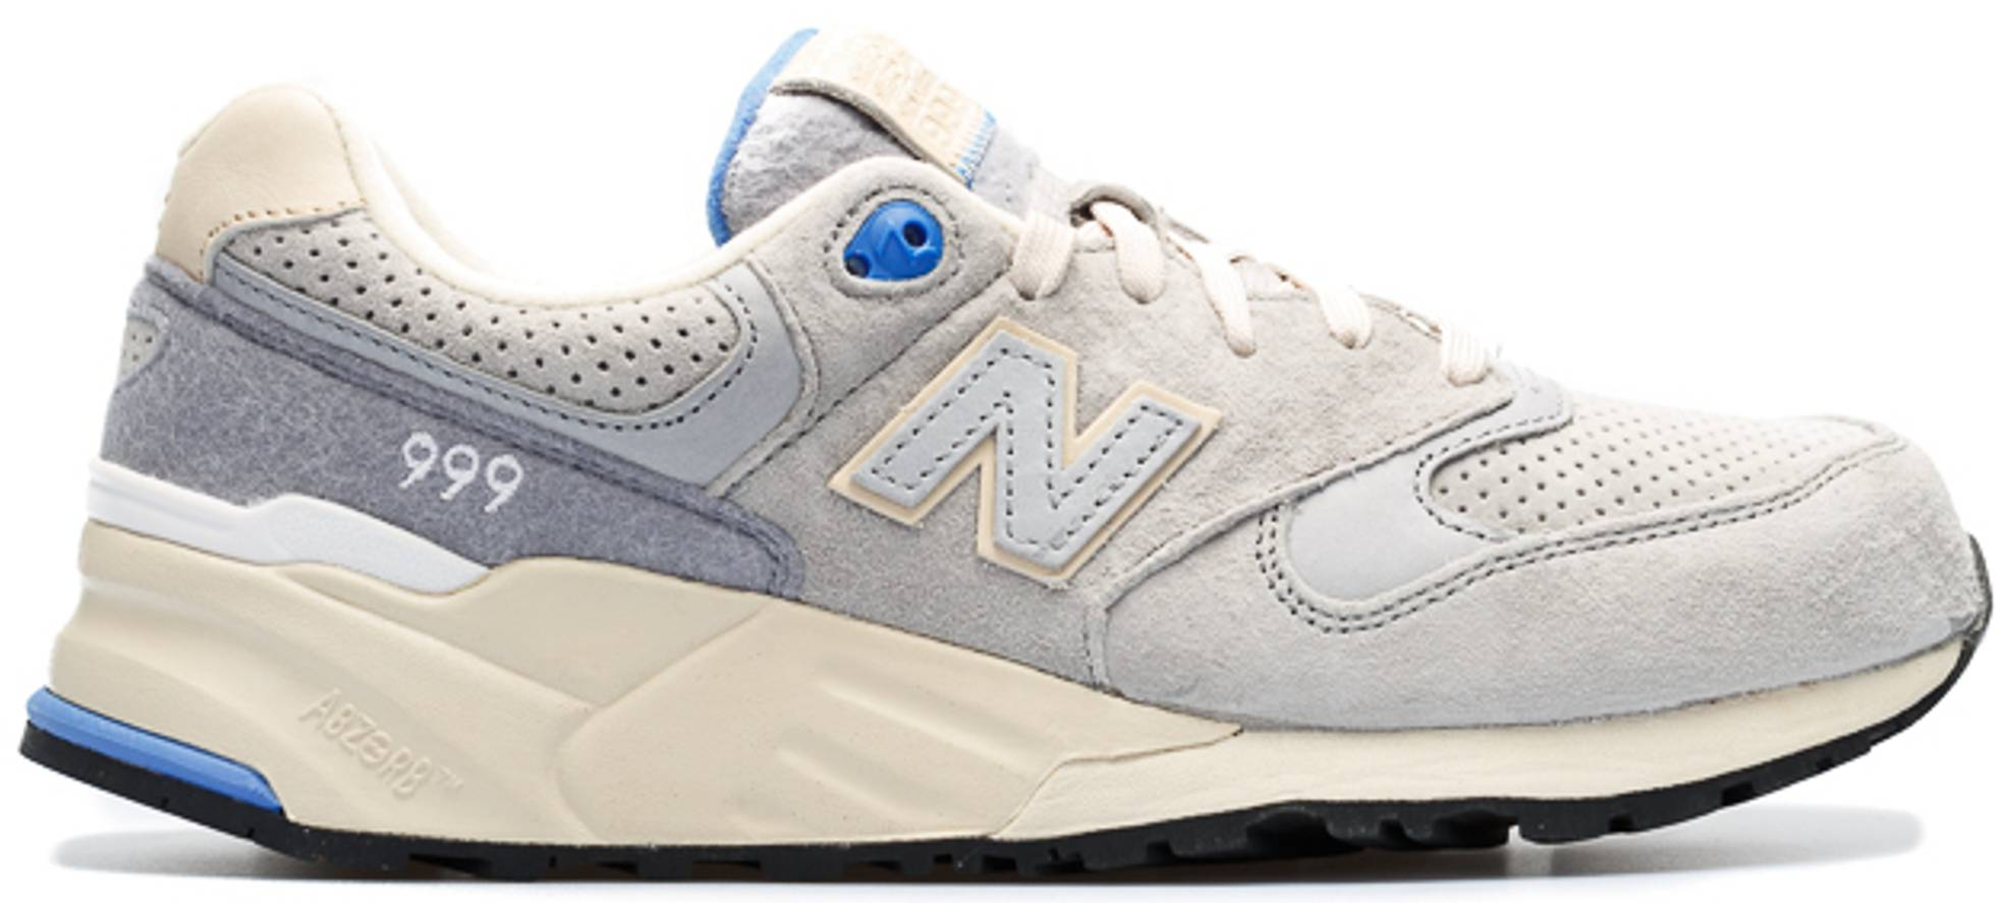 new balance sneakers 999